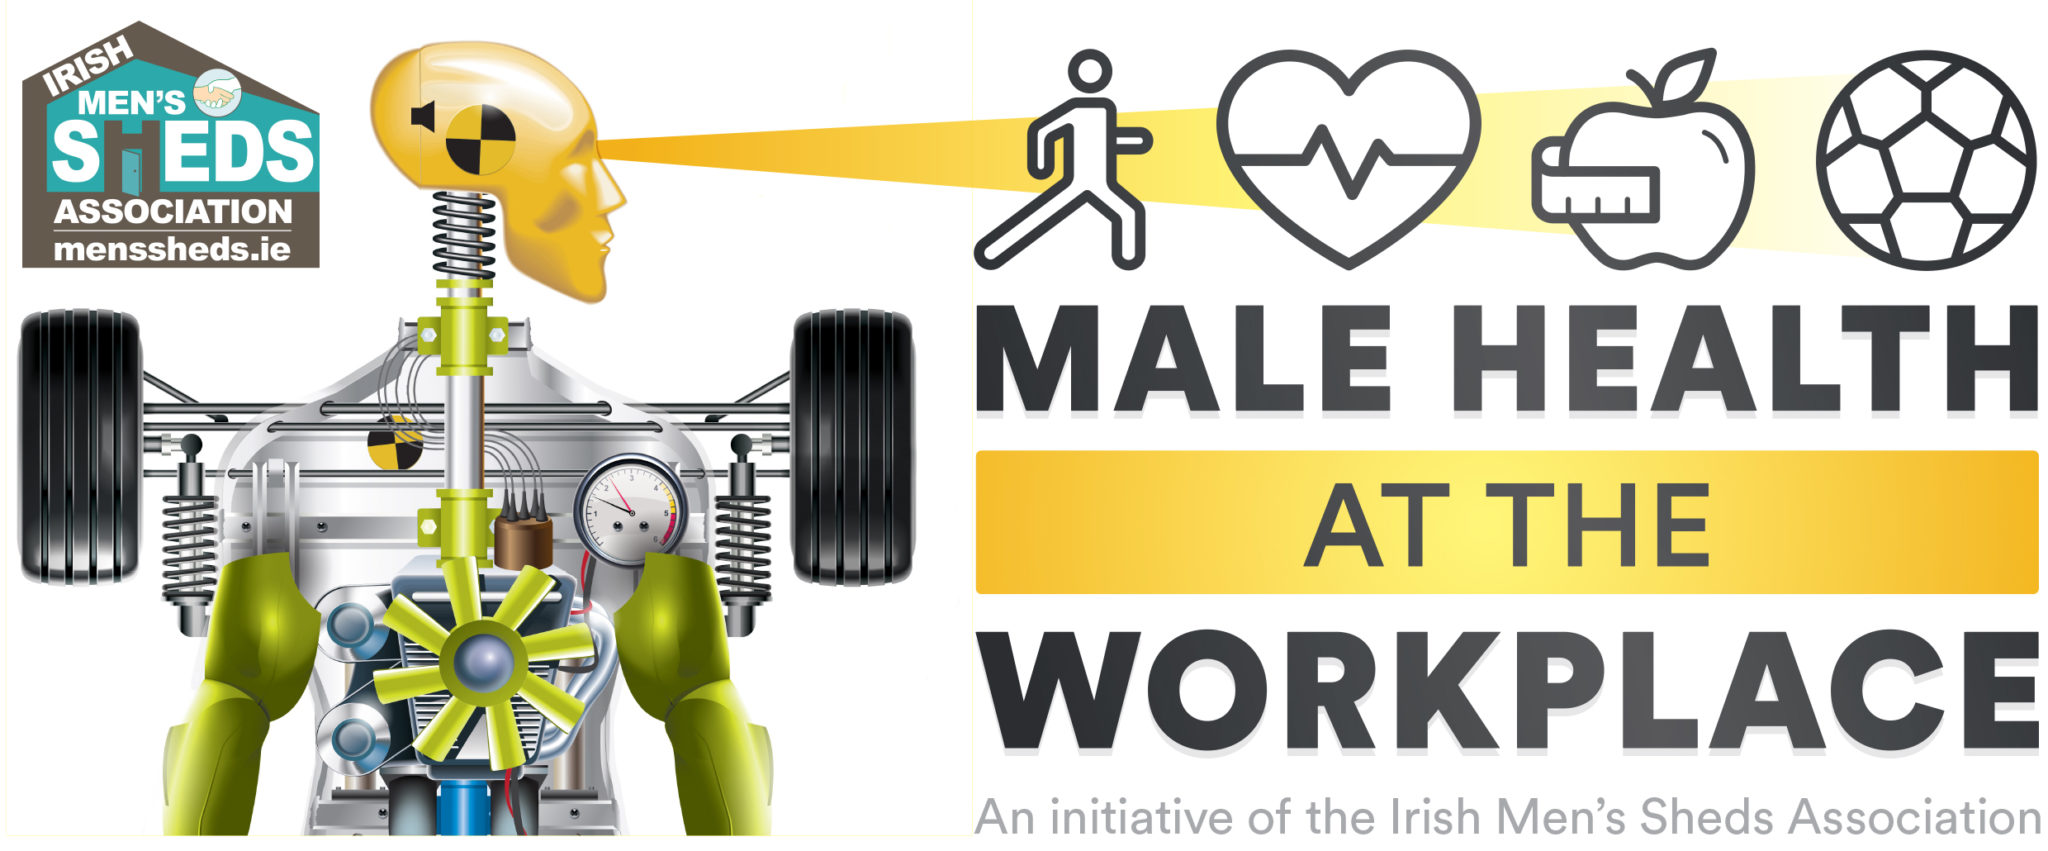 Male Health in the Workplace - Malehealth.ie